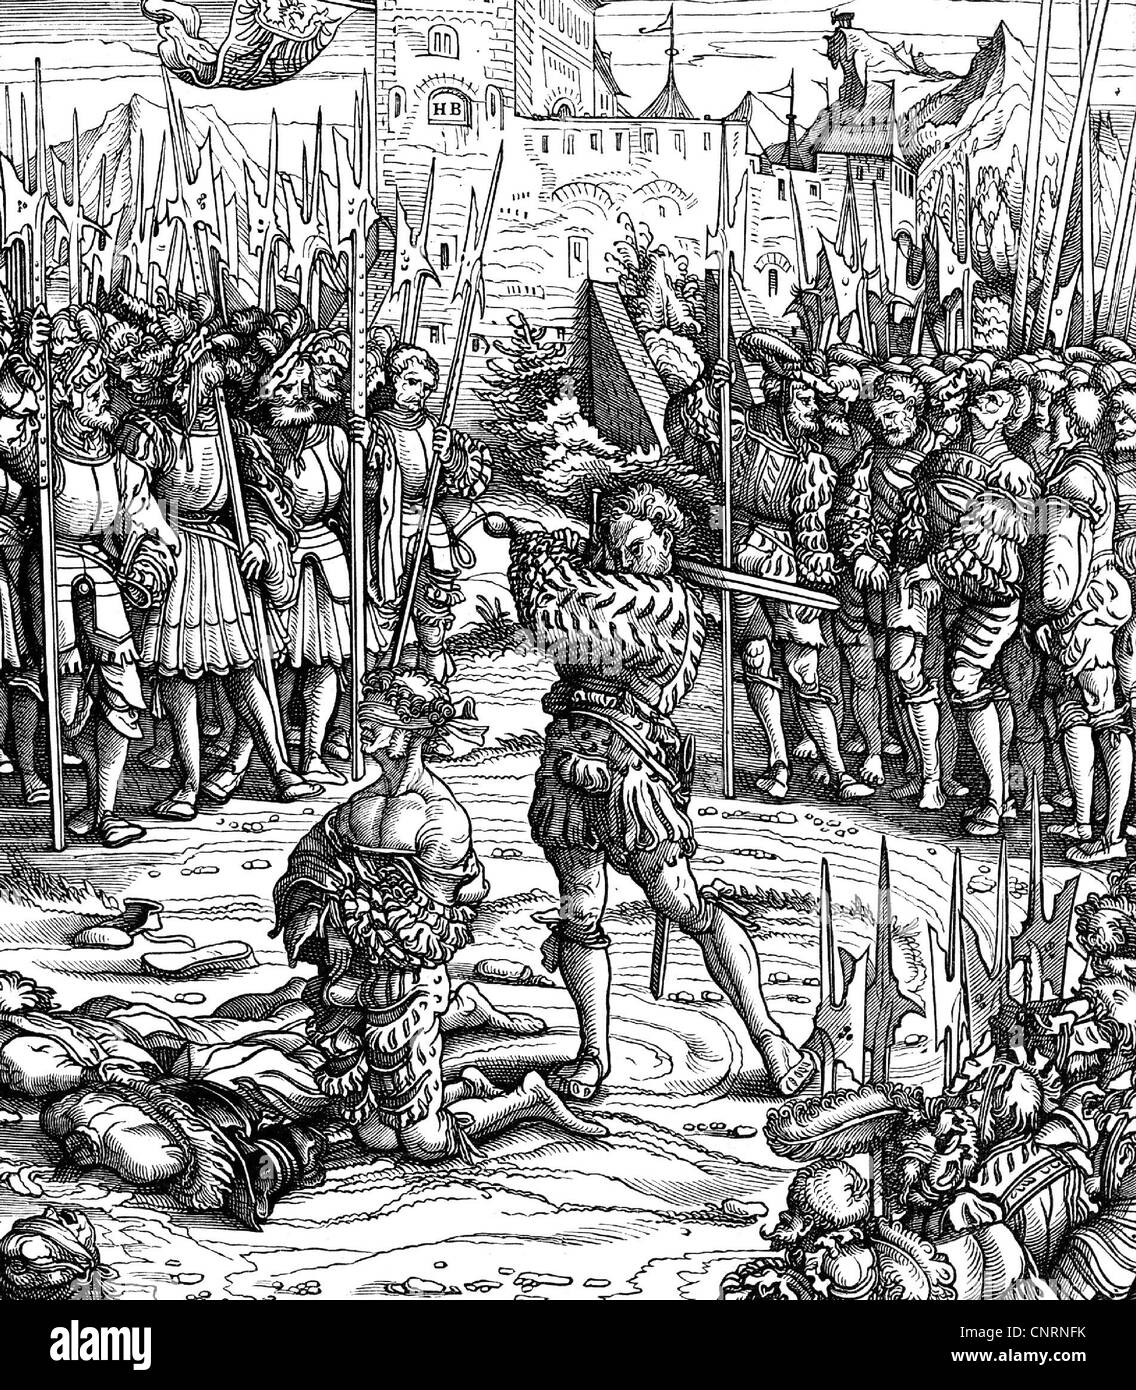 events, Landshut War of Succession 1503 - 1505, siege of Kufstein 1504, execution of Hans von Pienzenau, leader of the defenders, woodcut, by Hans Burgkmeier, 1513, Additional-Rights-Clearences-Not Available Stock Photo